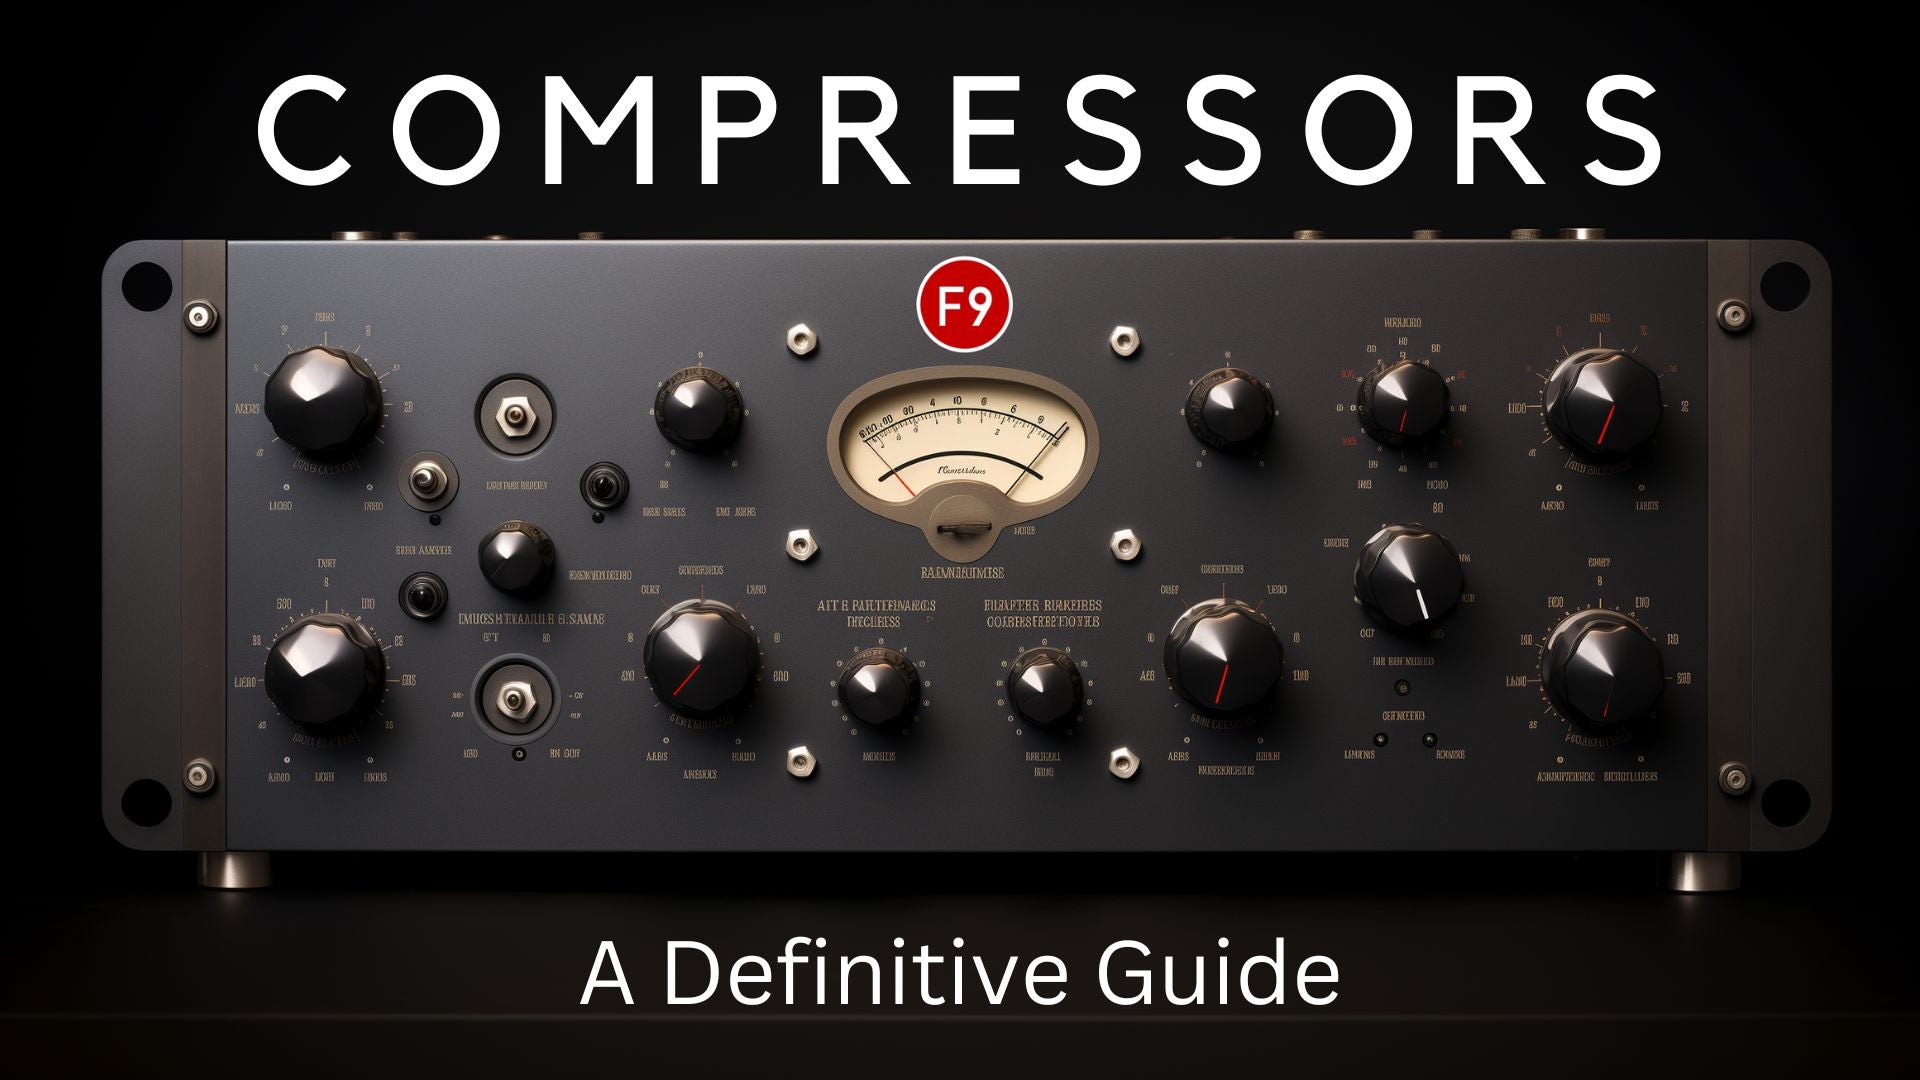 Do You think you know EVERYTHING about Compressors?